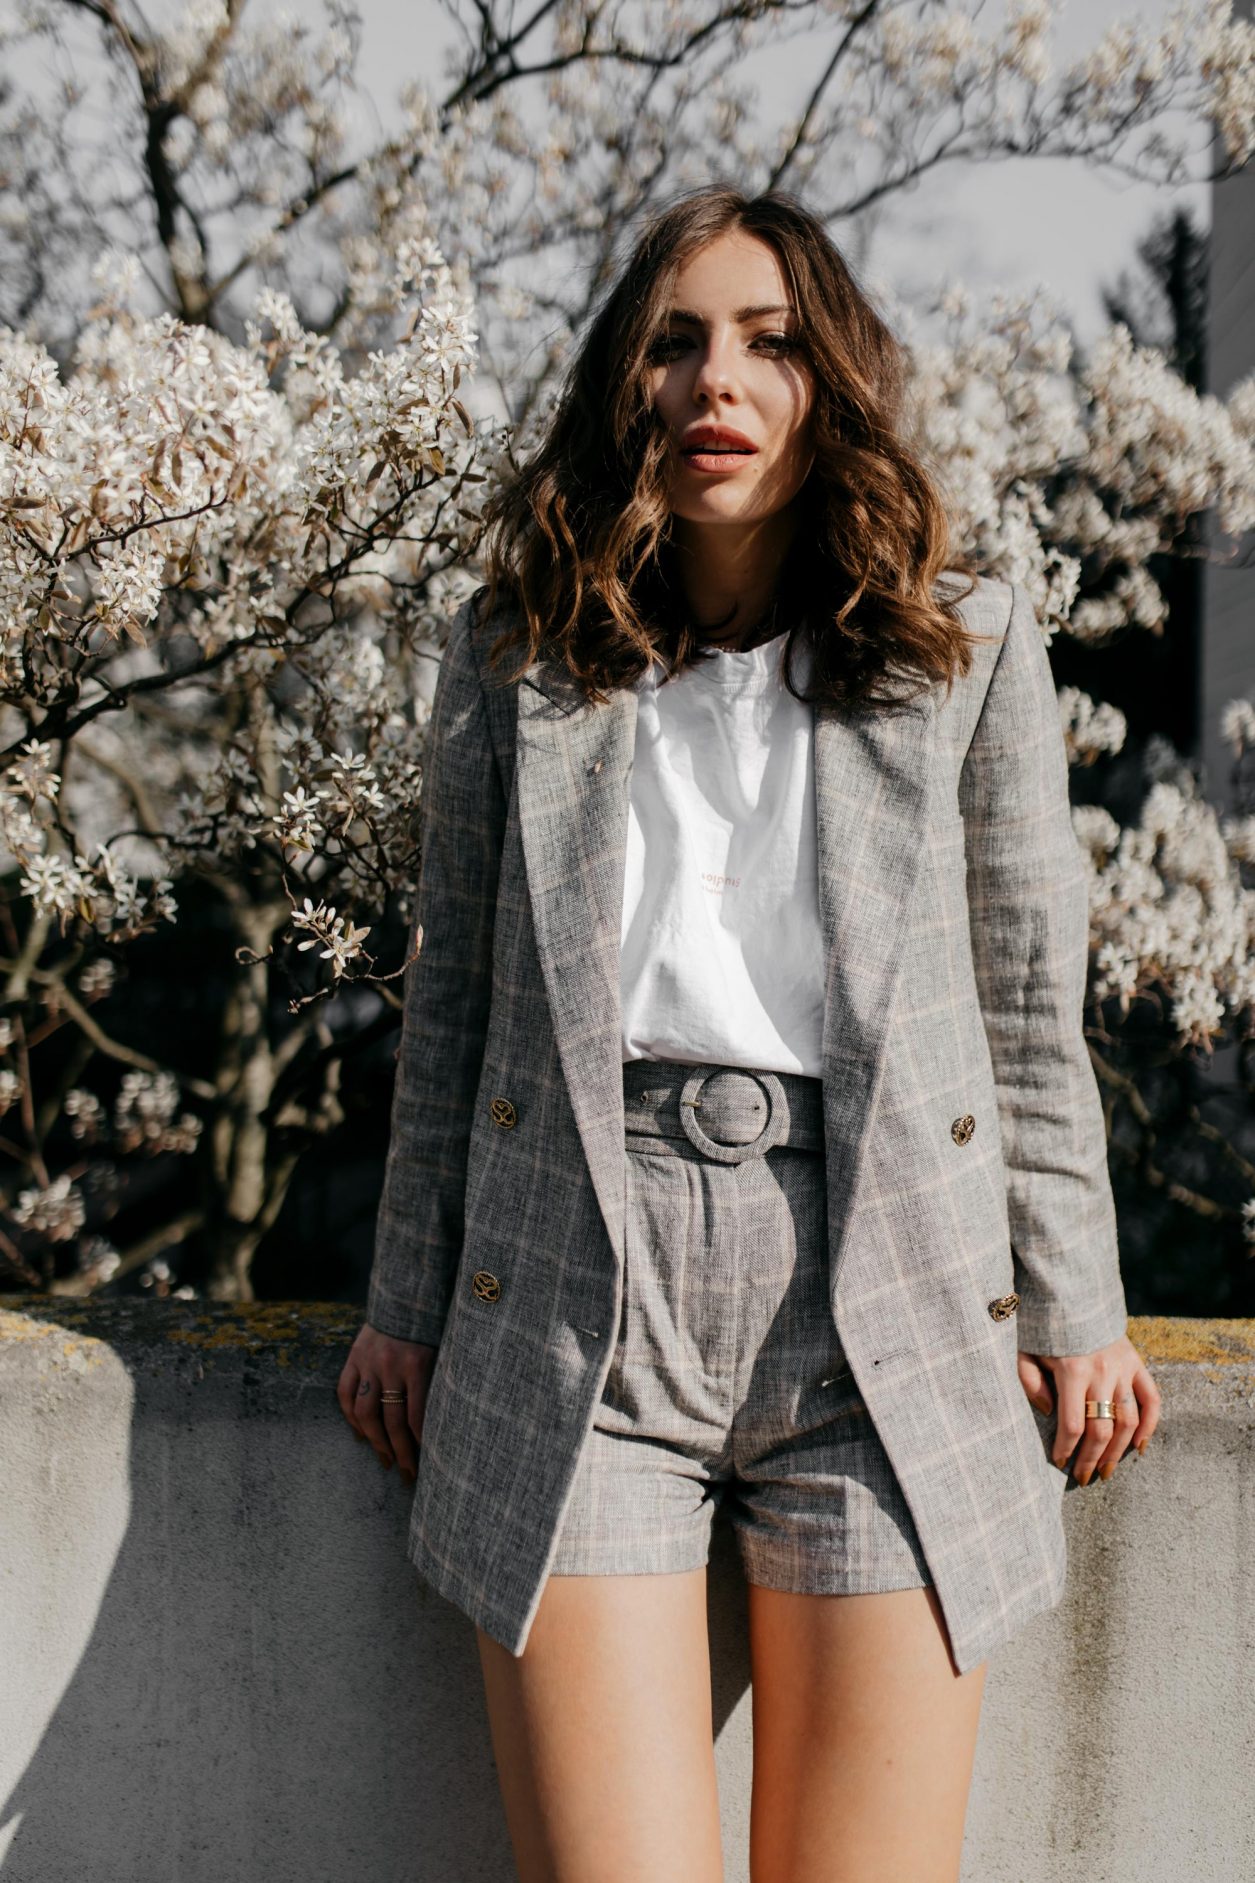 Streetstyle by Masha Sedgwick | Spring editorial, summer business suit with pants, outfit inspiration | Wearing linen beige checked shorts suit by Sandro Paris, white basic tee by Acne Studios